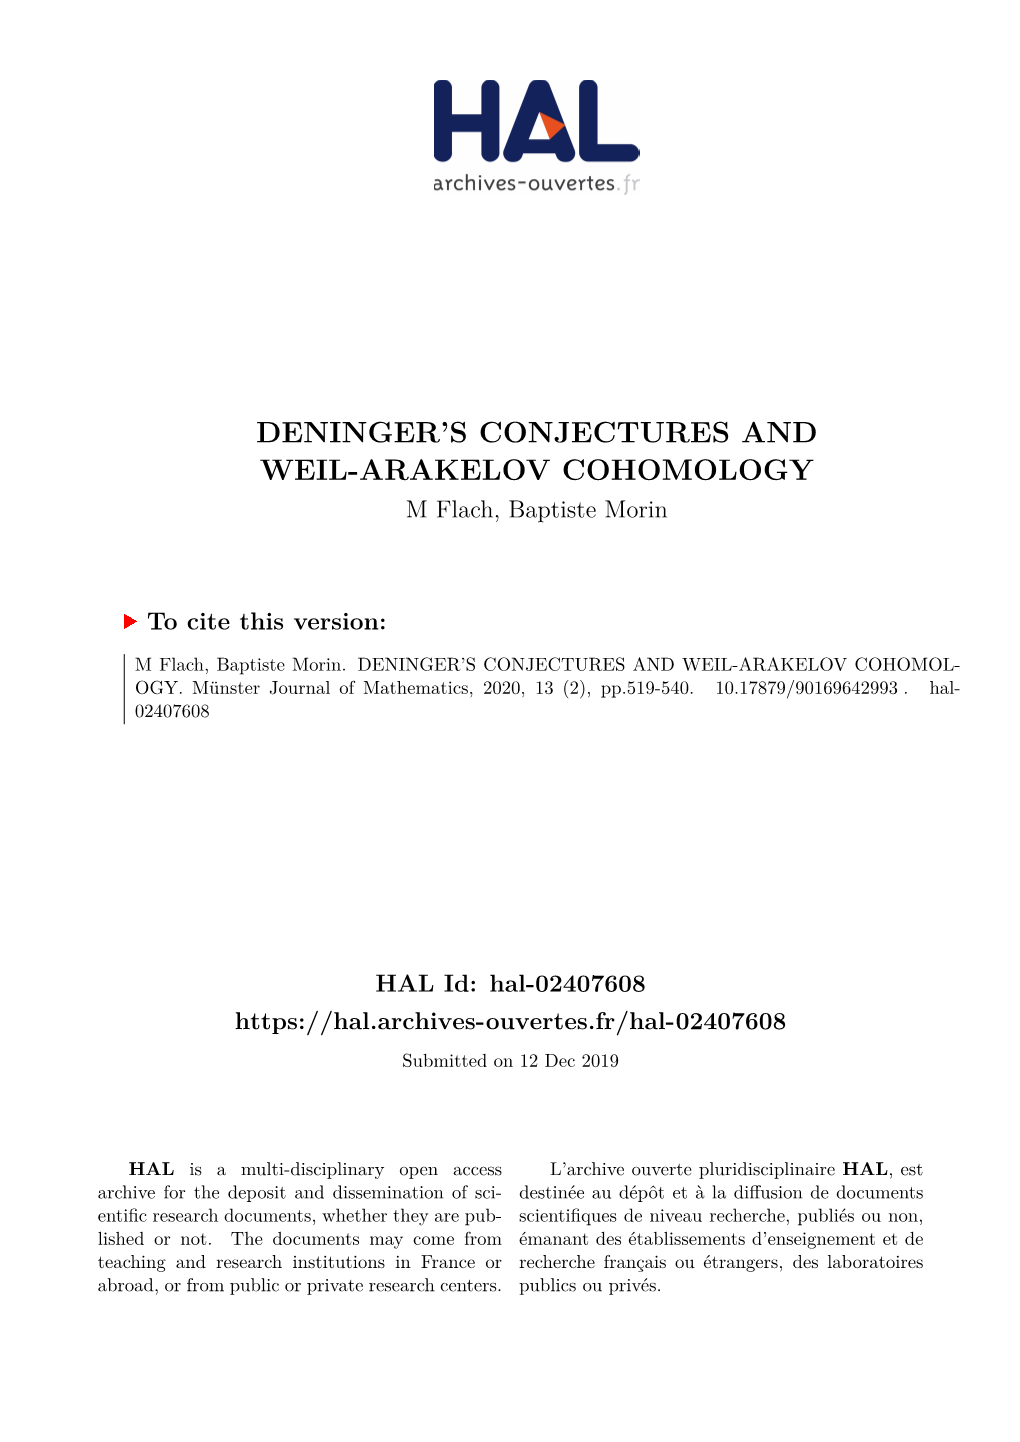 Deninger's Conjectures and Weil-Arakelov Cohomology